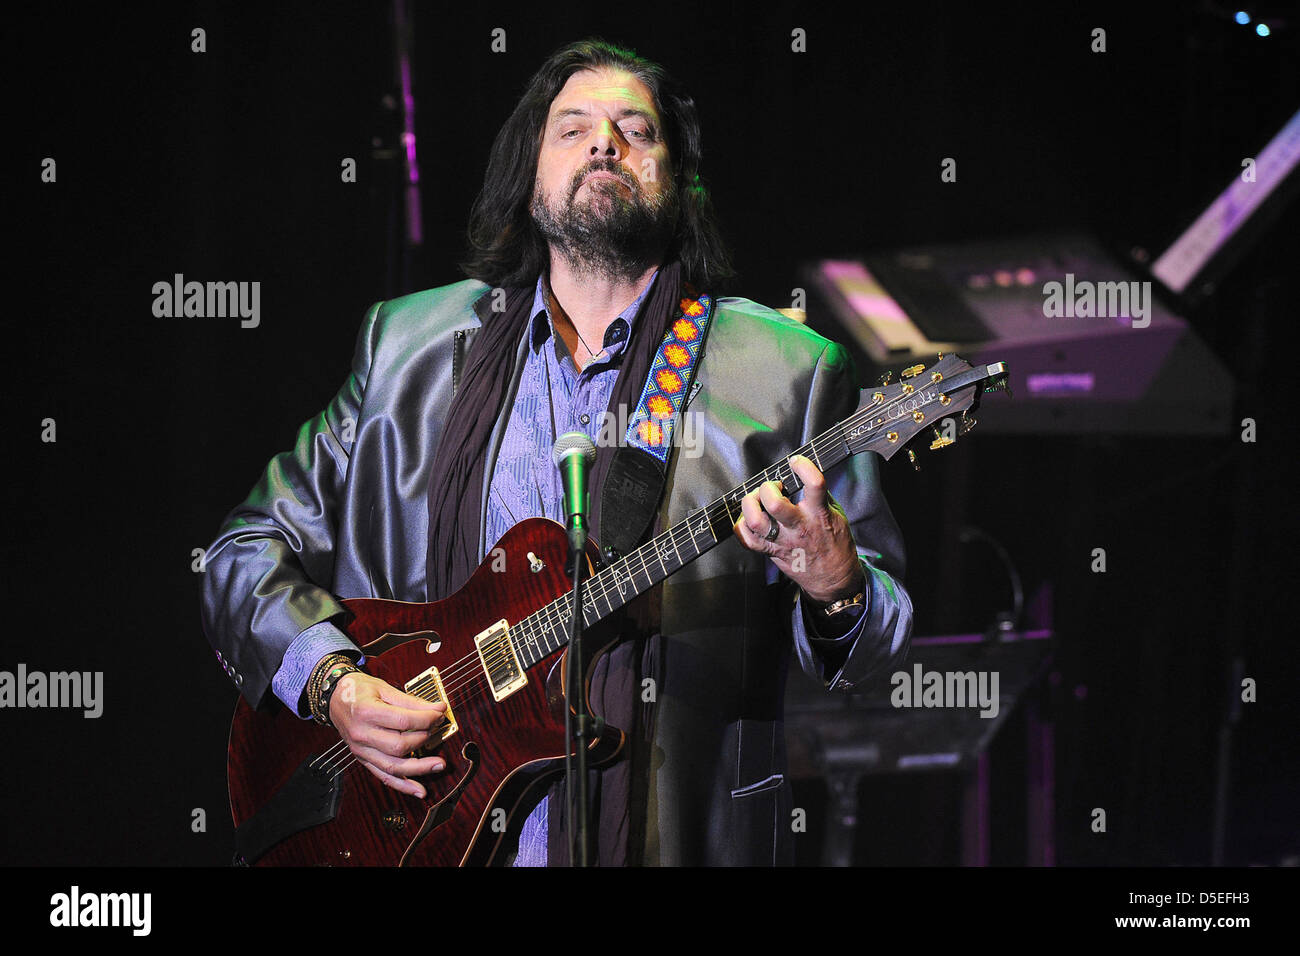 Alan Parsons, British musician and founder of the Alan Parsons Live Project, performs with the Alan Parsons Project within the Greatest Hits Tour 2013 at the Parkstad Limburg Theater in Heerlen, Germany, 29 March 2013. Photo: Revierfoto Stock Photo